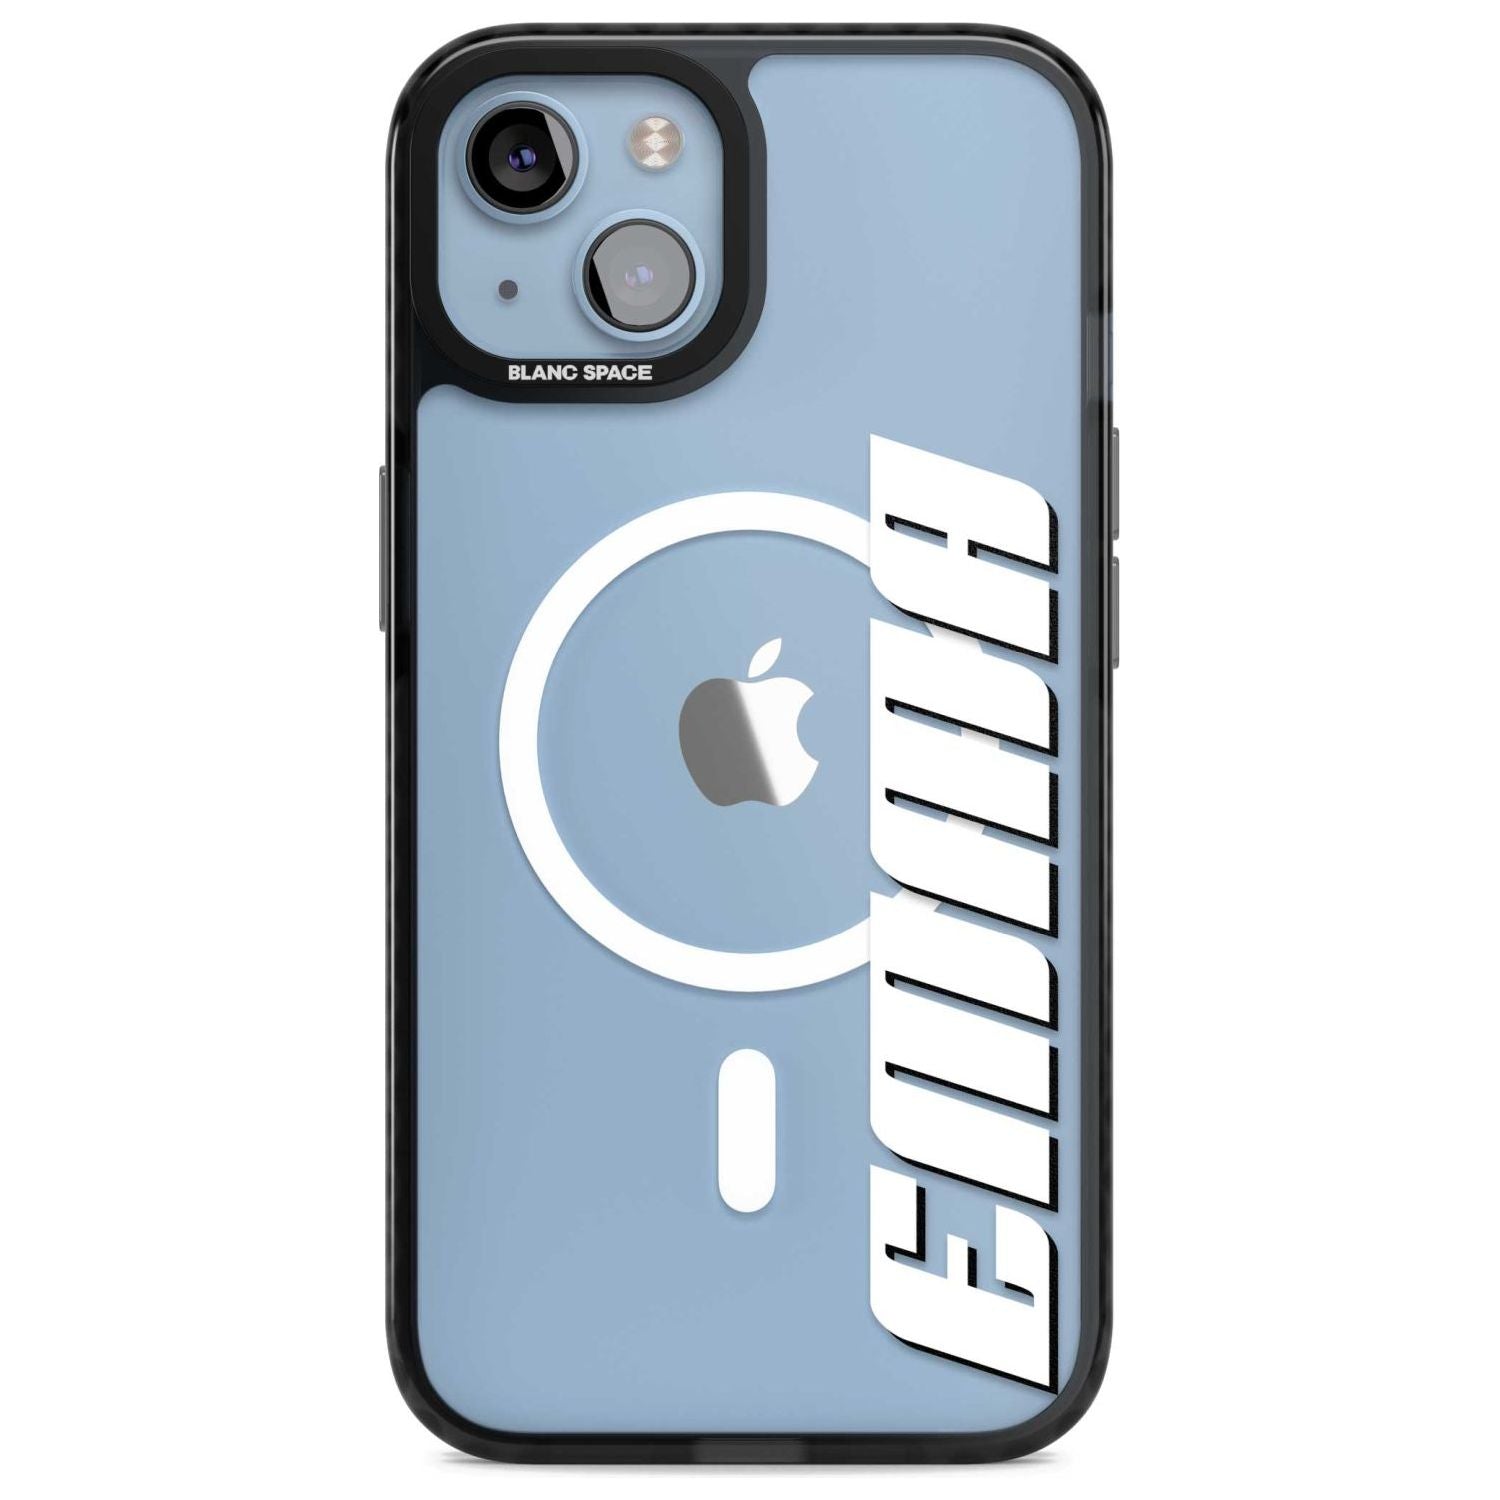 Personalised Clear Text  4B Custom Phone Case iPhone 15 Plus / Magsafe Black Impact Case,iPhone 15 / Magsafe Black Impact Case,iPhone 14 Plus / Magsafe Black Impact Case,iPhone 14 / Magsafe Black Impact Case,iPhone 13 / Magsafe Black Impact Case Blanc Space